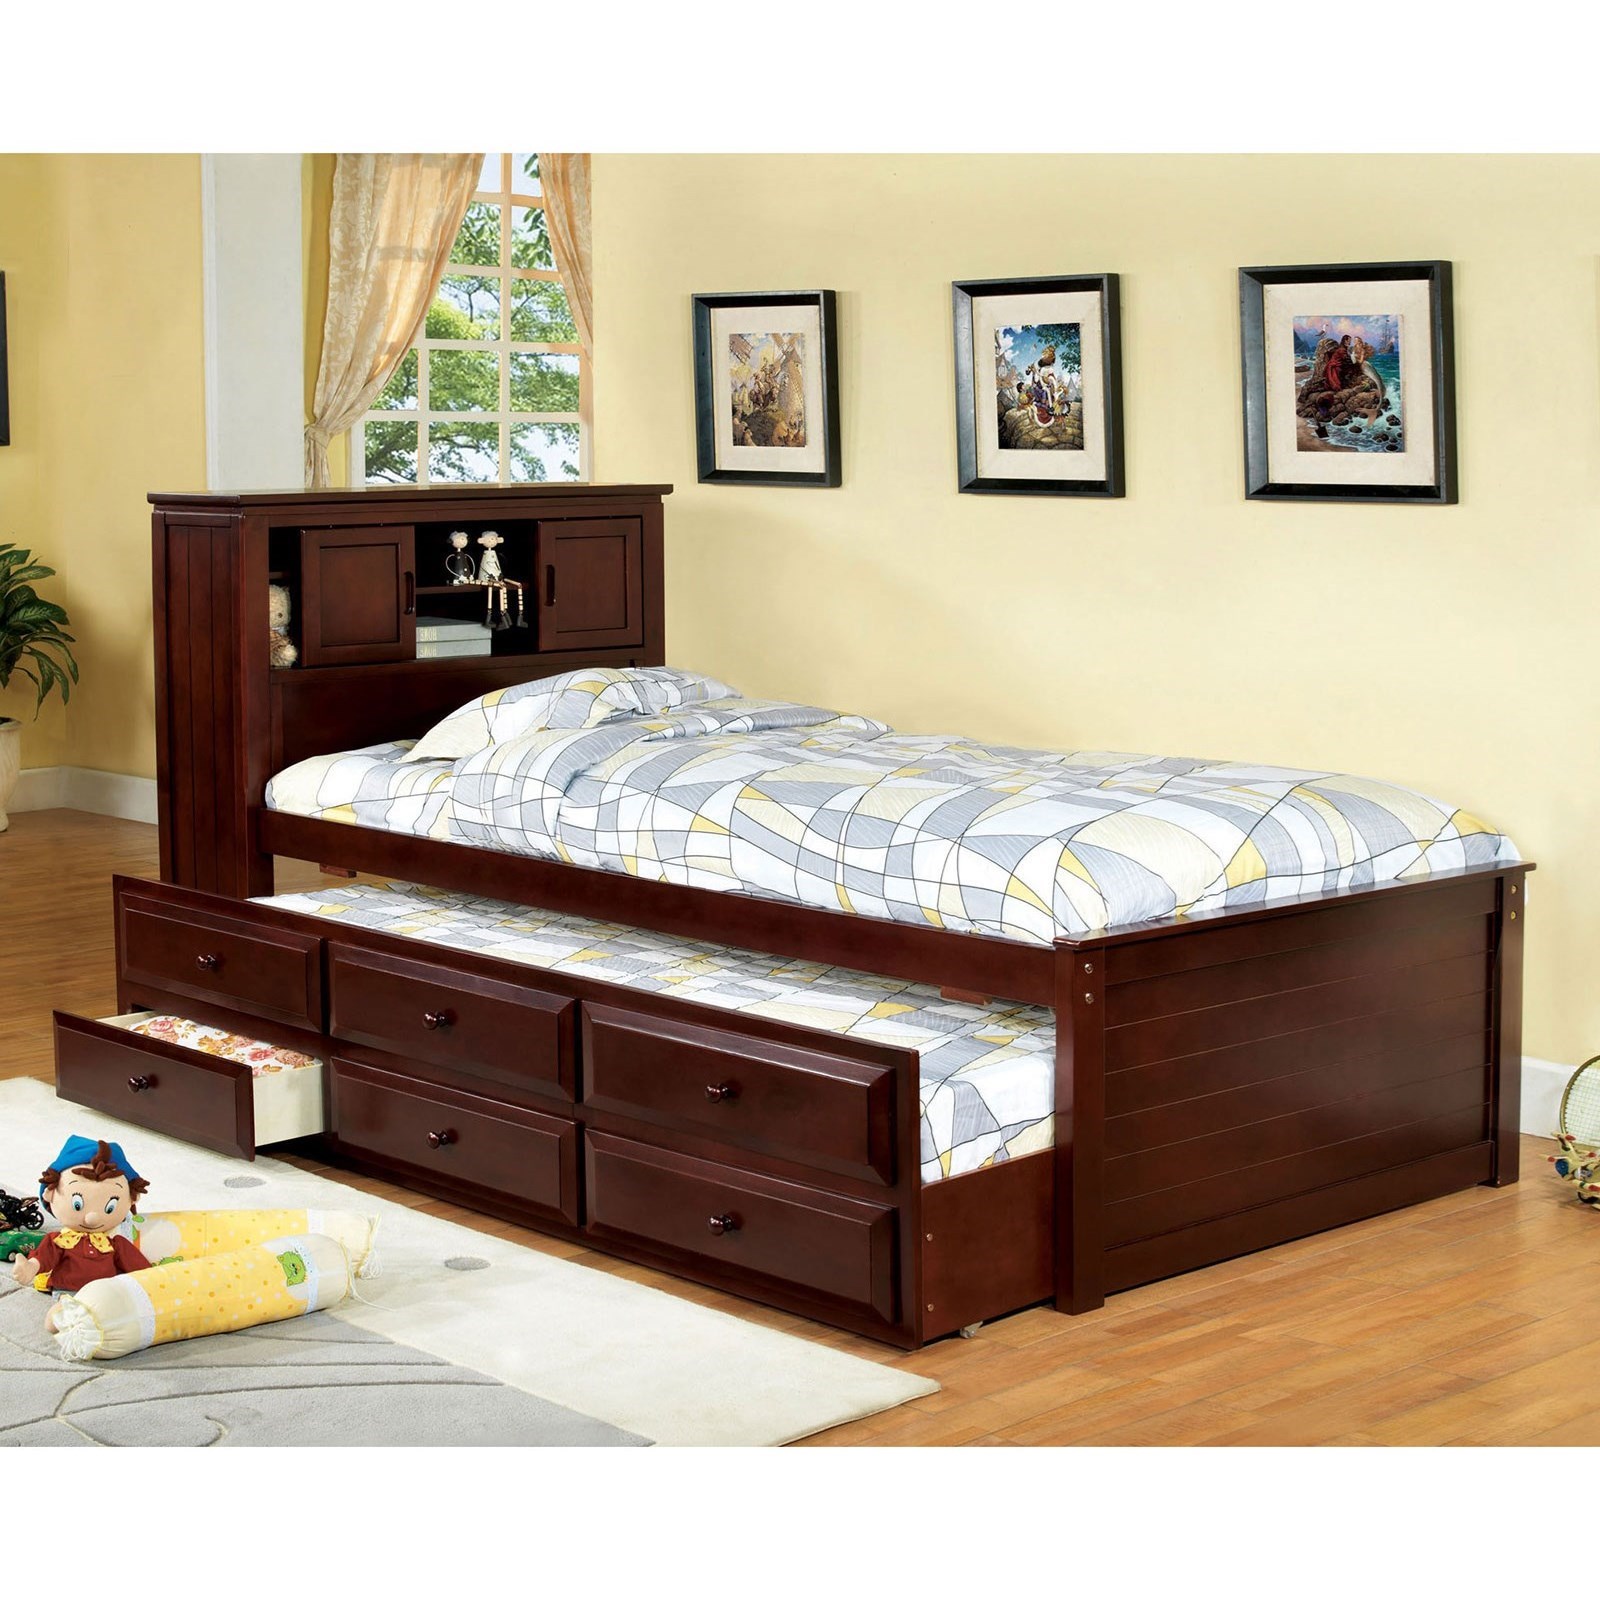 3 twin beds